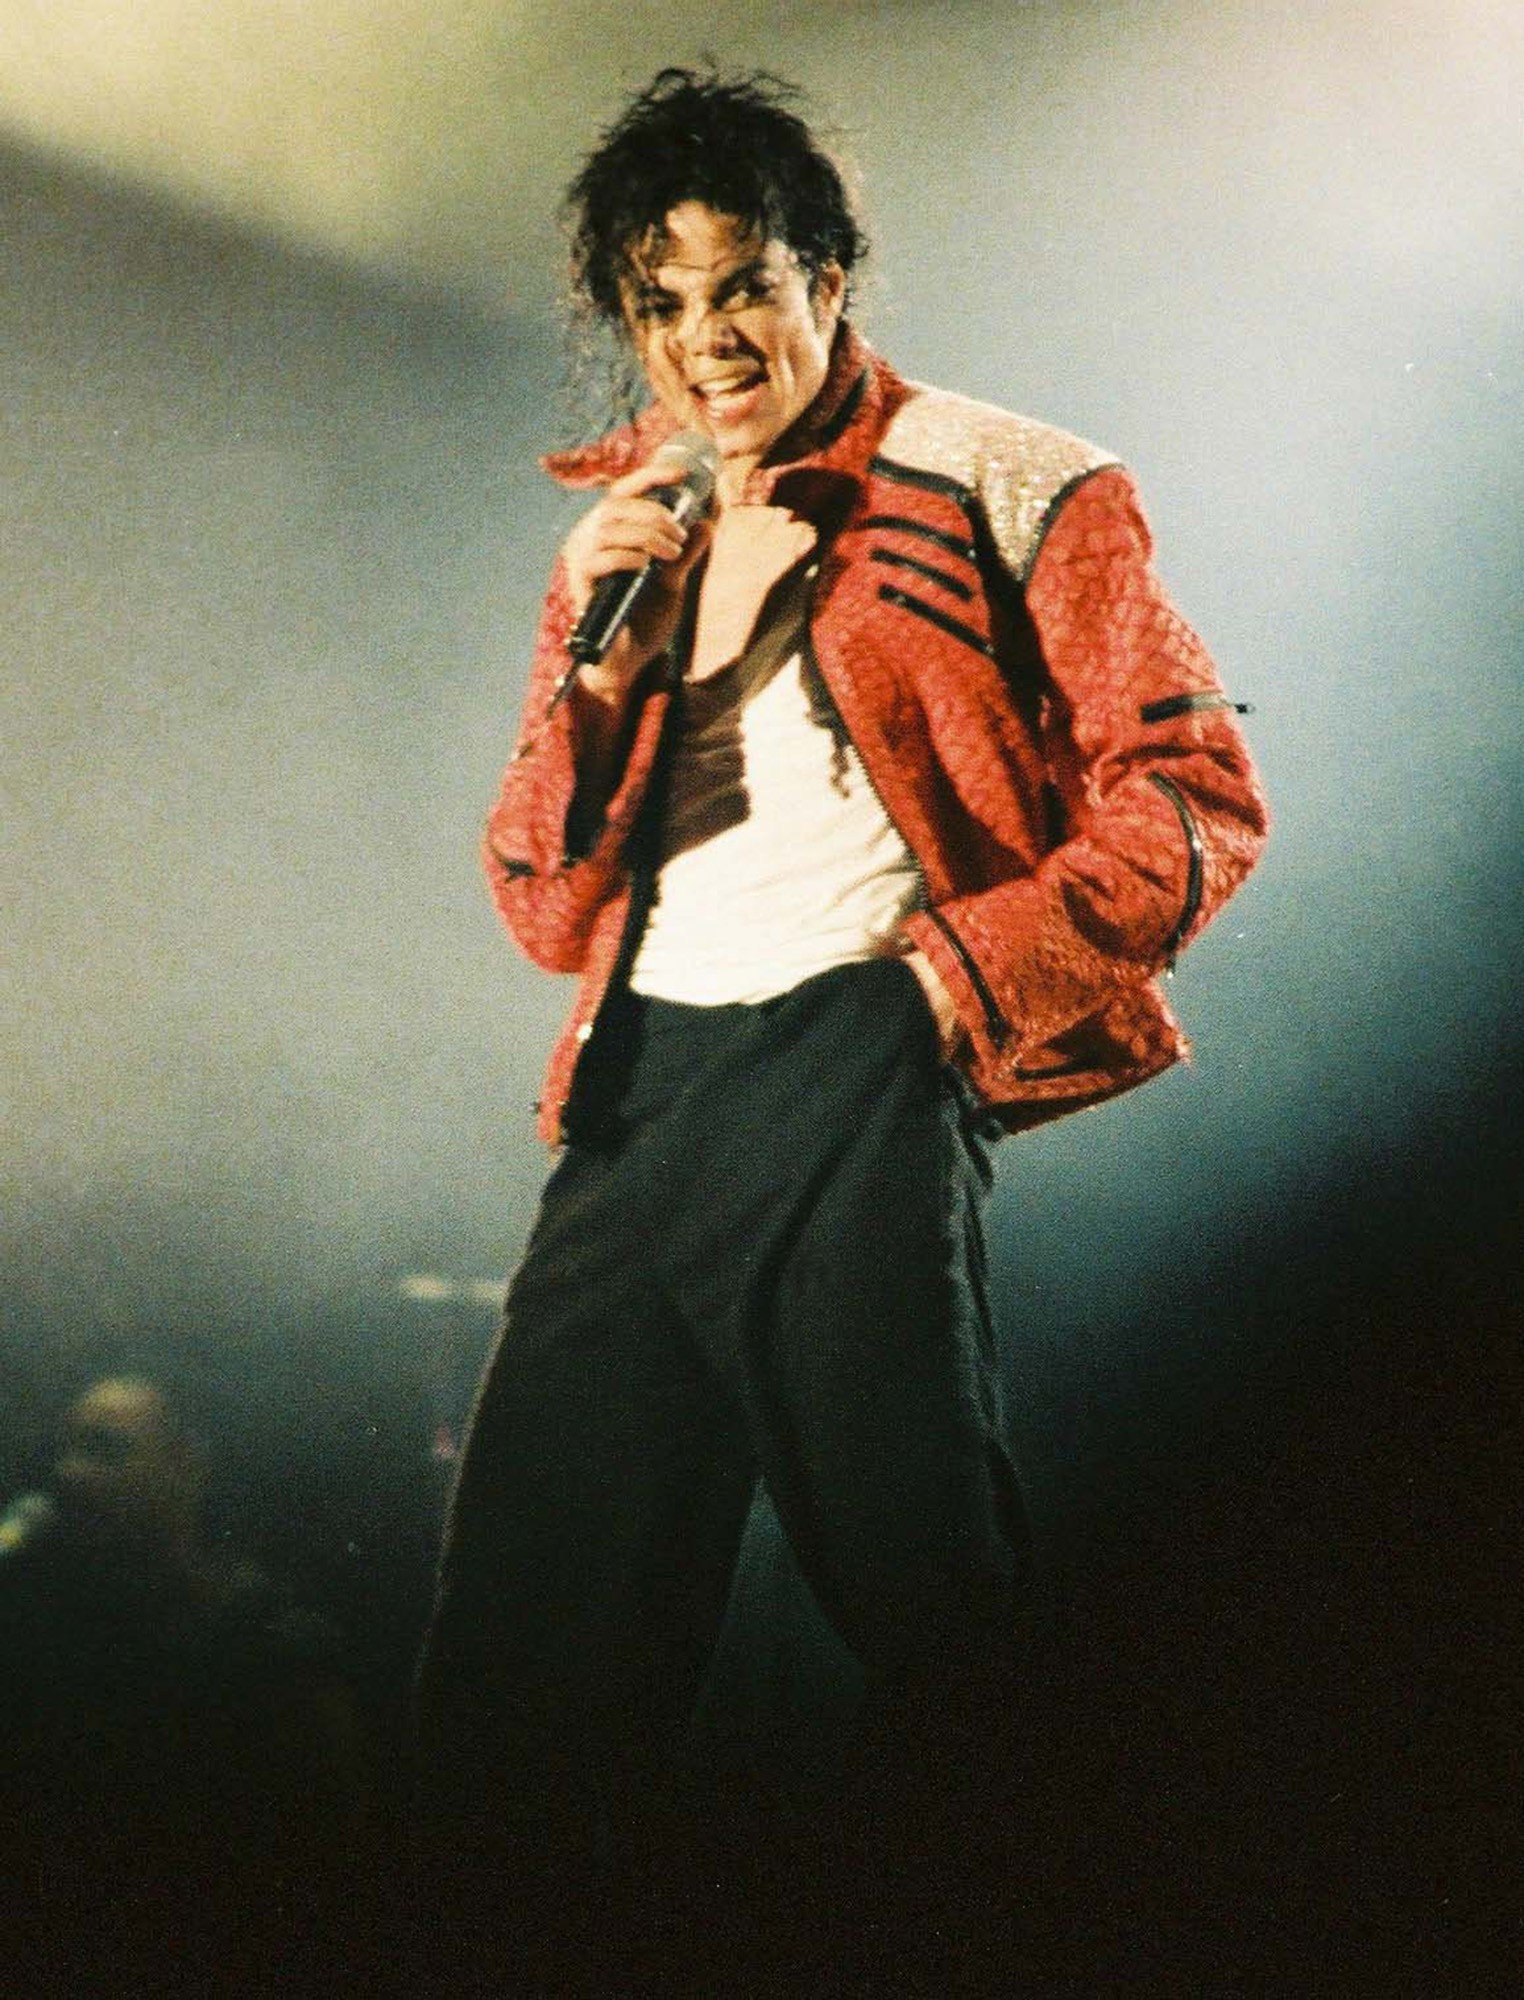 Top 10 Michael Jackson Outfits